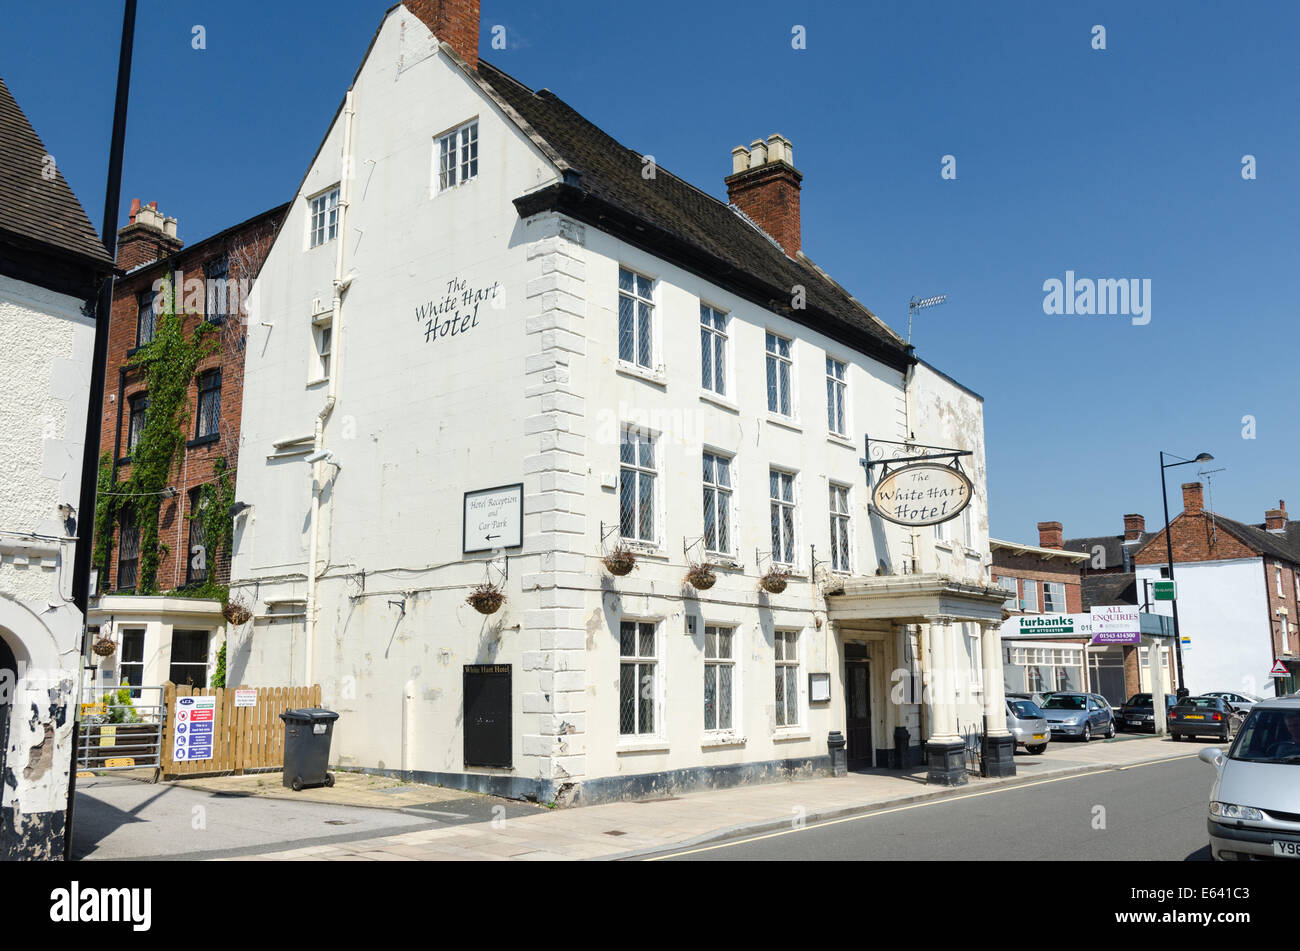 The White Hart Hotel in Uttoxeter, Staffordshire which is undergoing refurbishment Stock Photo